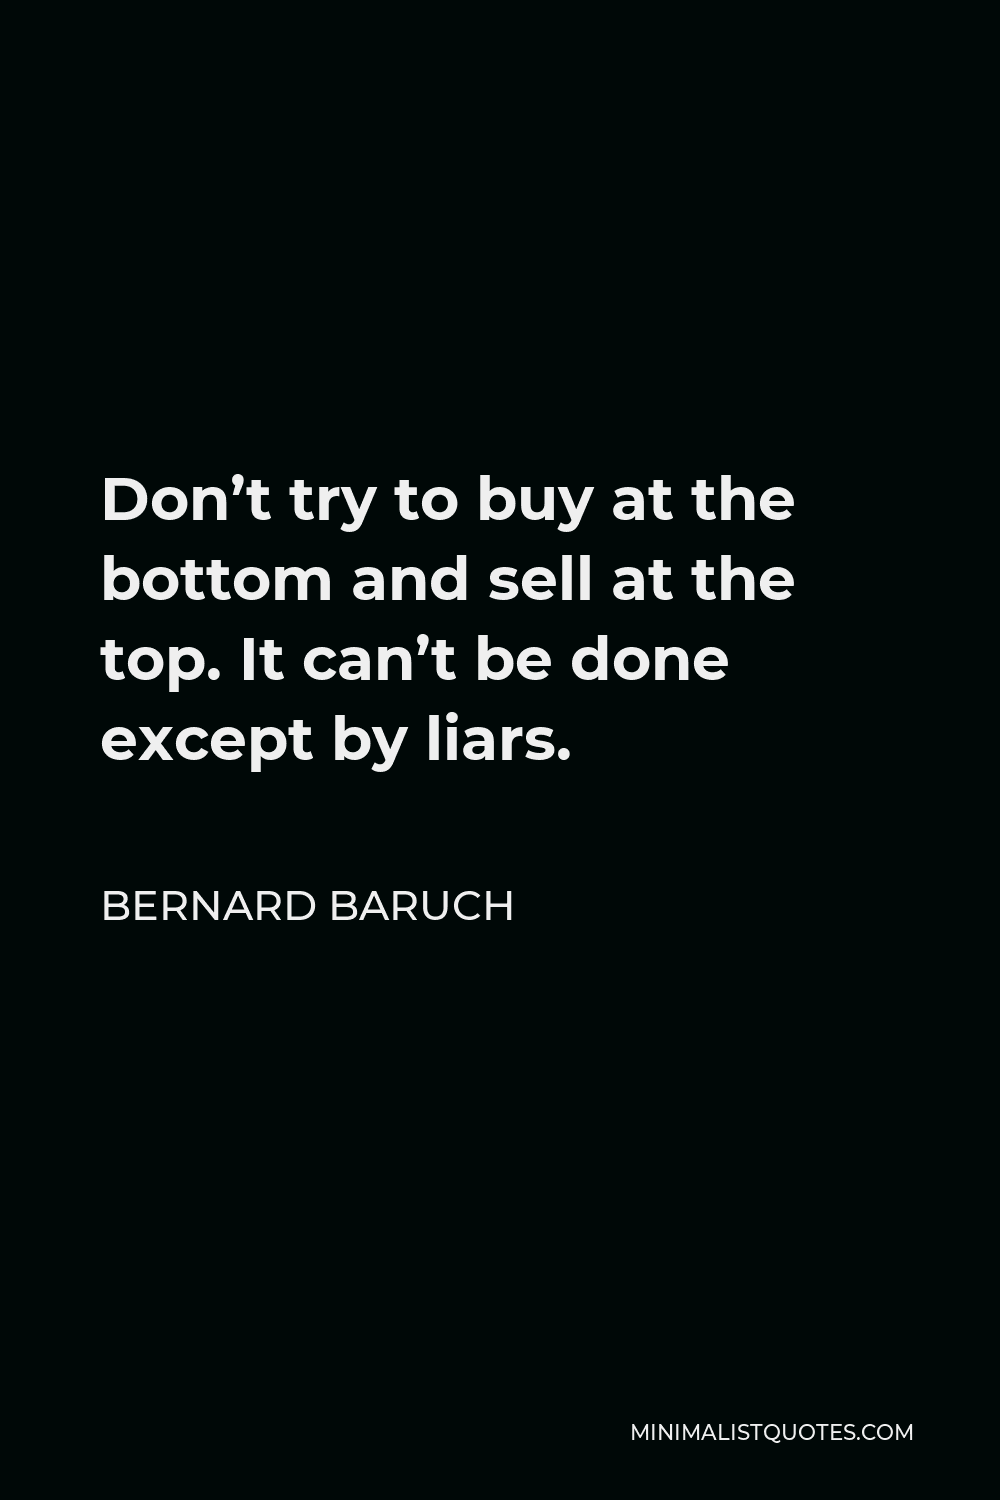 Bernard Baruch Quote - Don’t try to buy at the bottom and sell at the top. It can’t be done except by liars.